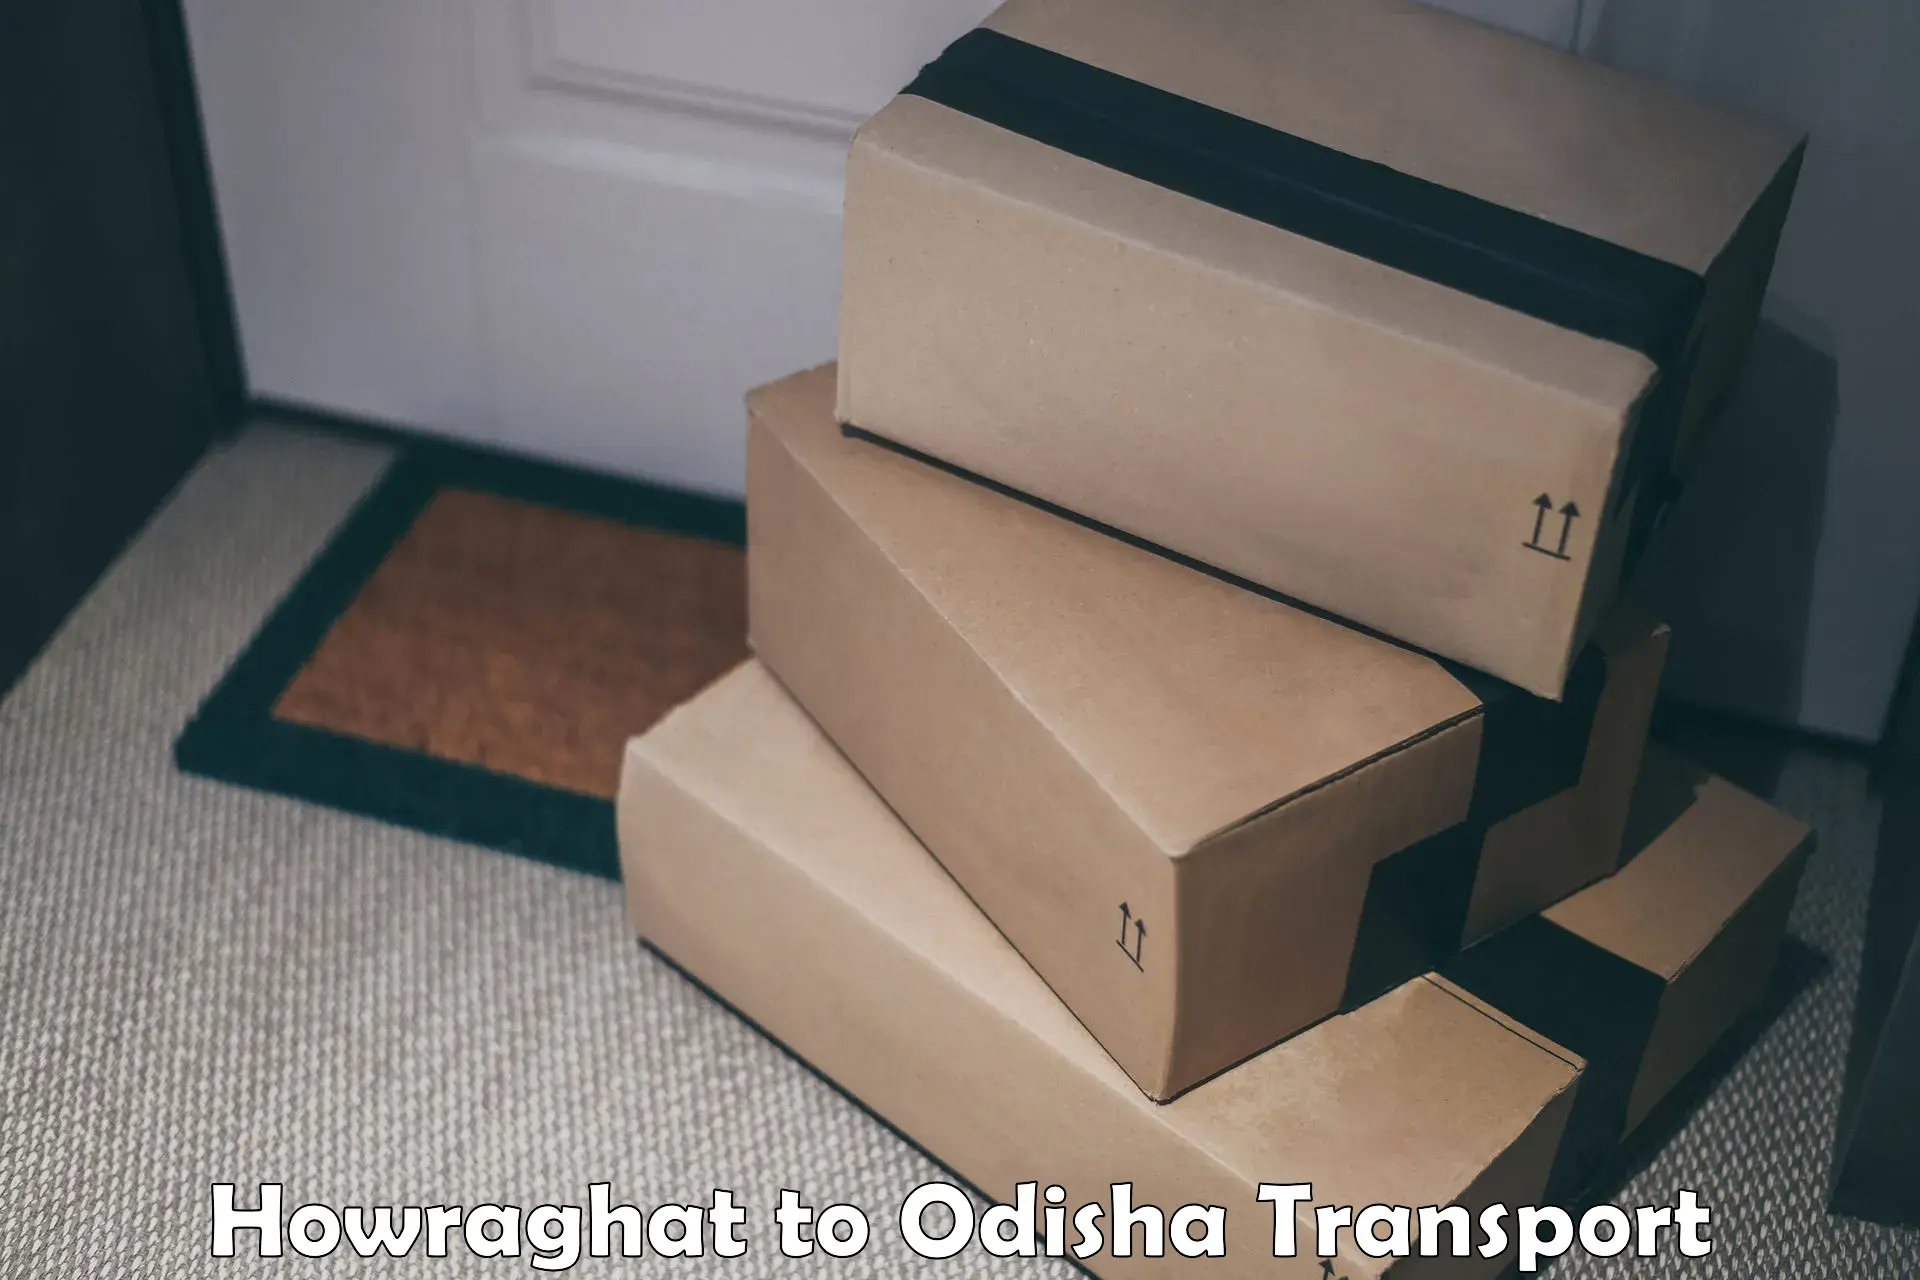 Road transport online services Howraghat to Daspalla